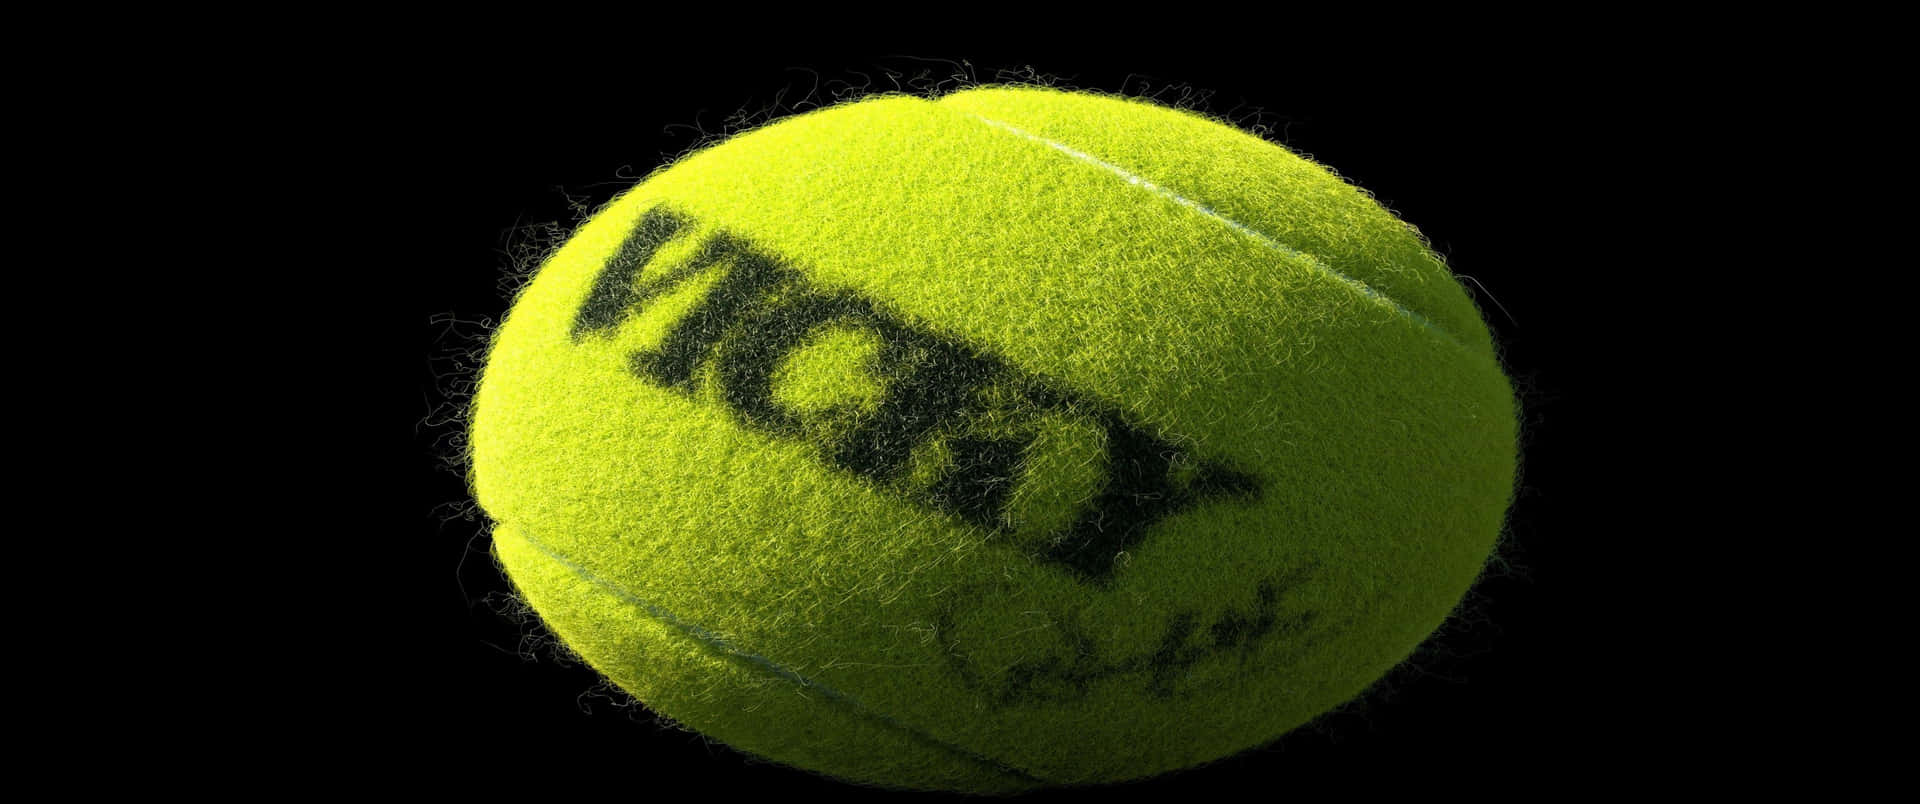 A Tennis Ball With The Word Victor On It